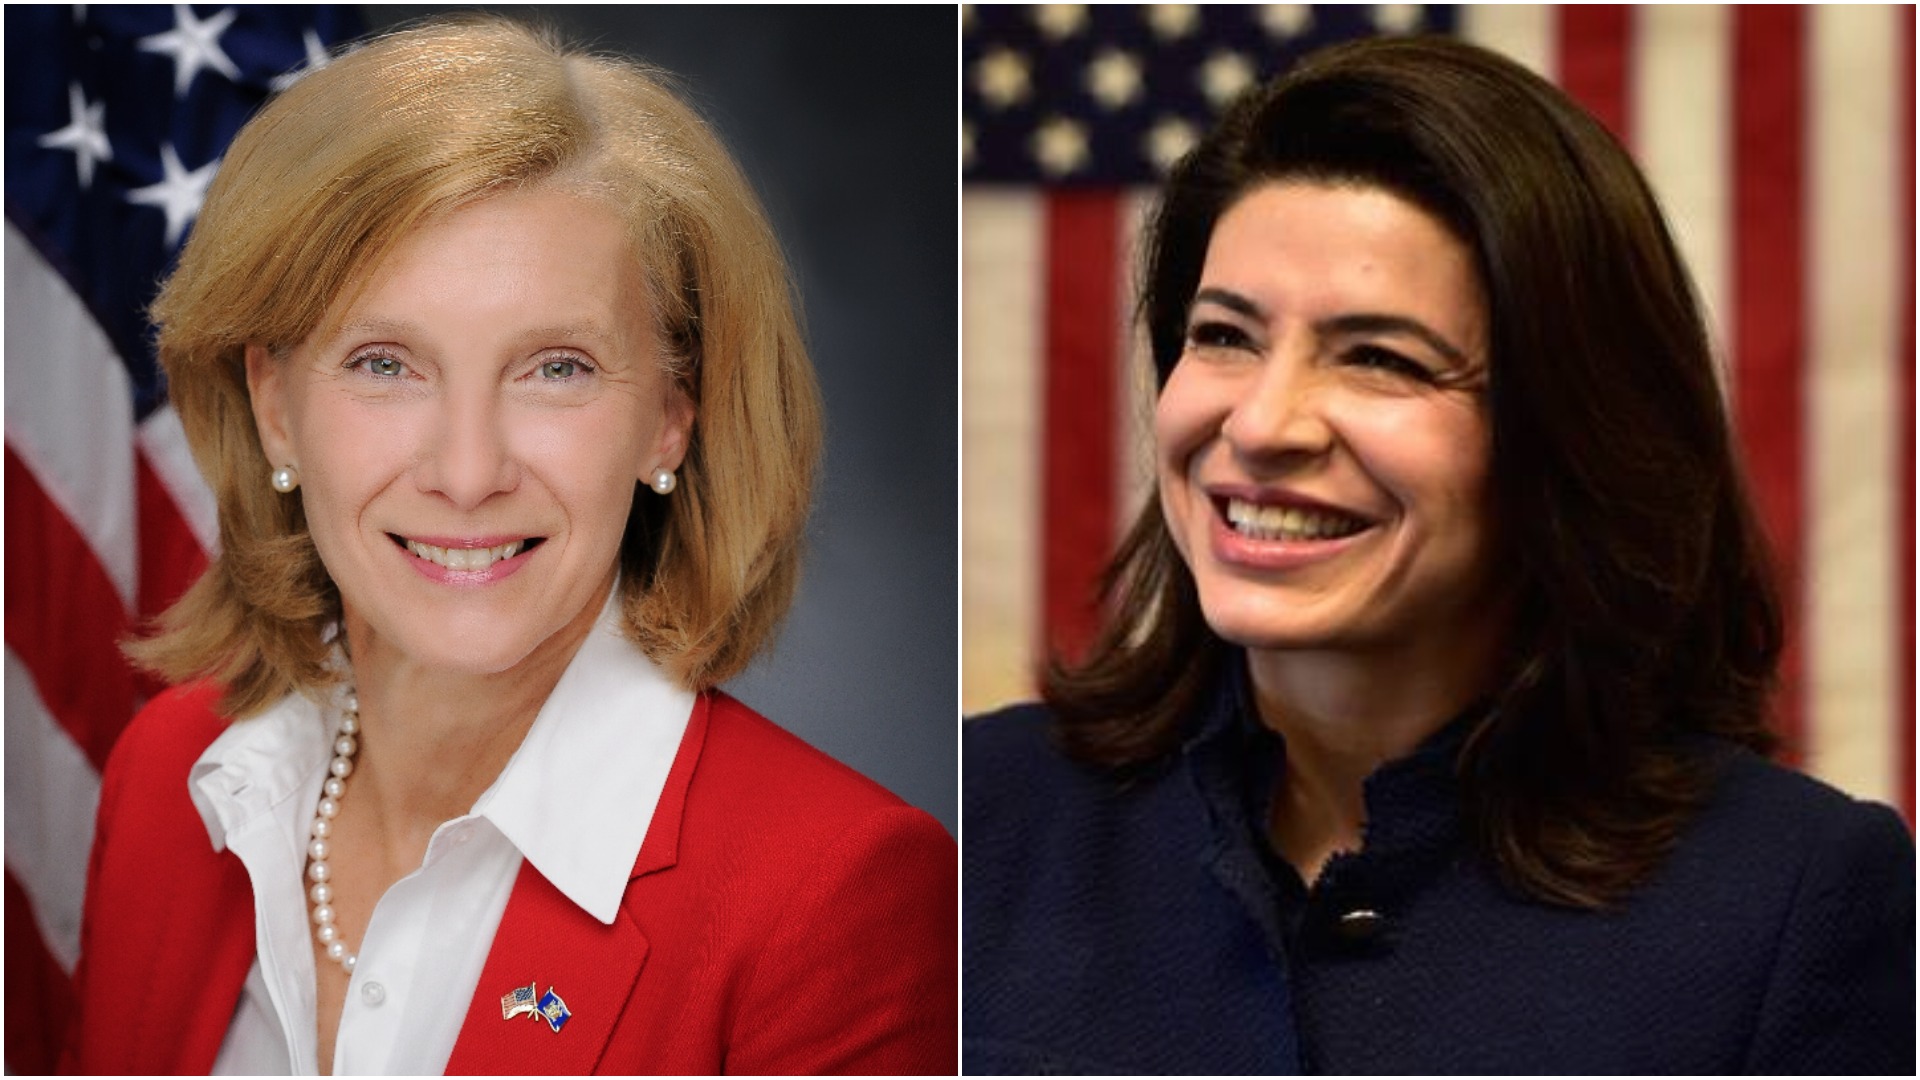 State Sen. Elaine Phillips, left, has out raised North Hempstead Town Councilwoman Anna Kaplan, according to campaign filing records. (Photos courtesy of Elaine Phillips and Anna Kaplan)